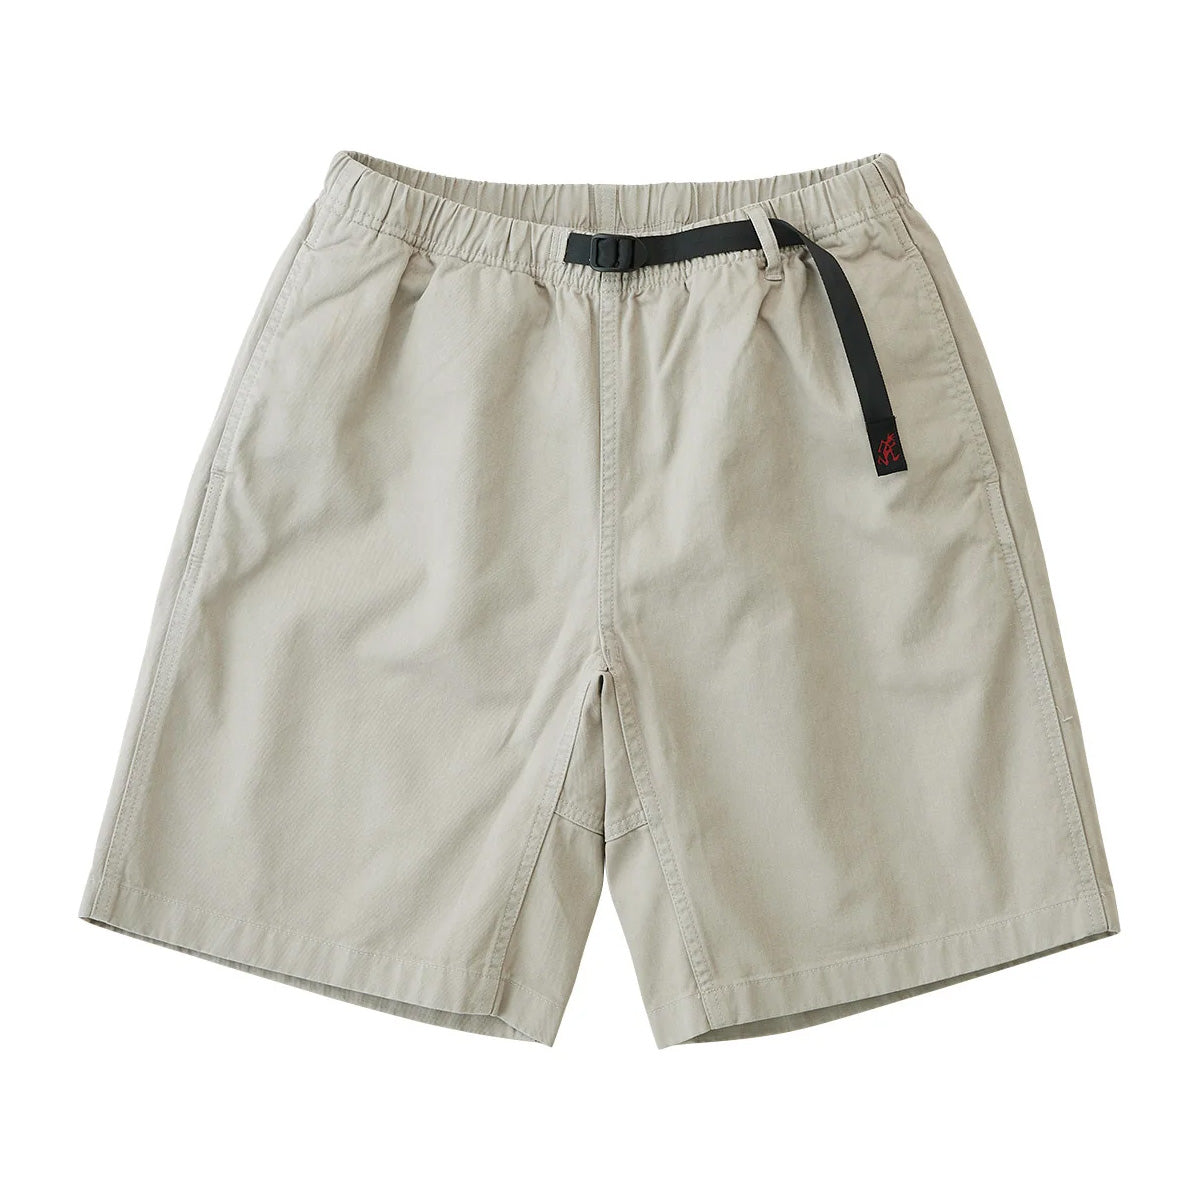 Cream gramicci outdoor shorts with adjustable waist. Free uk shipping over £50